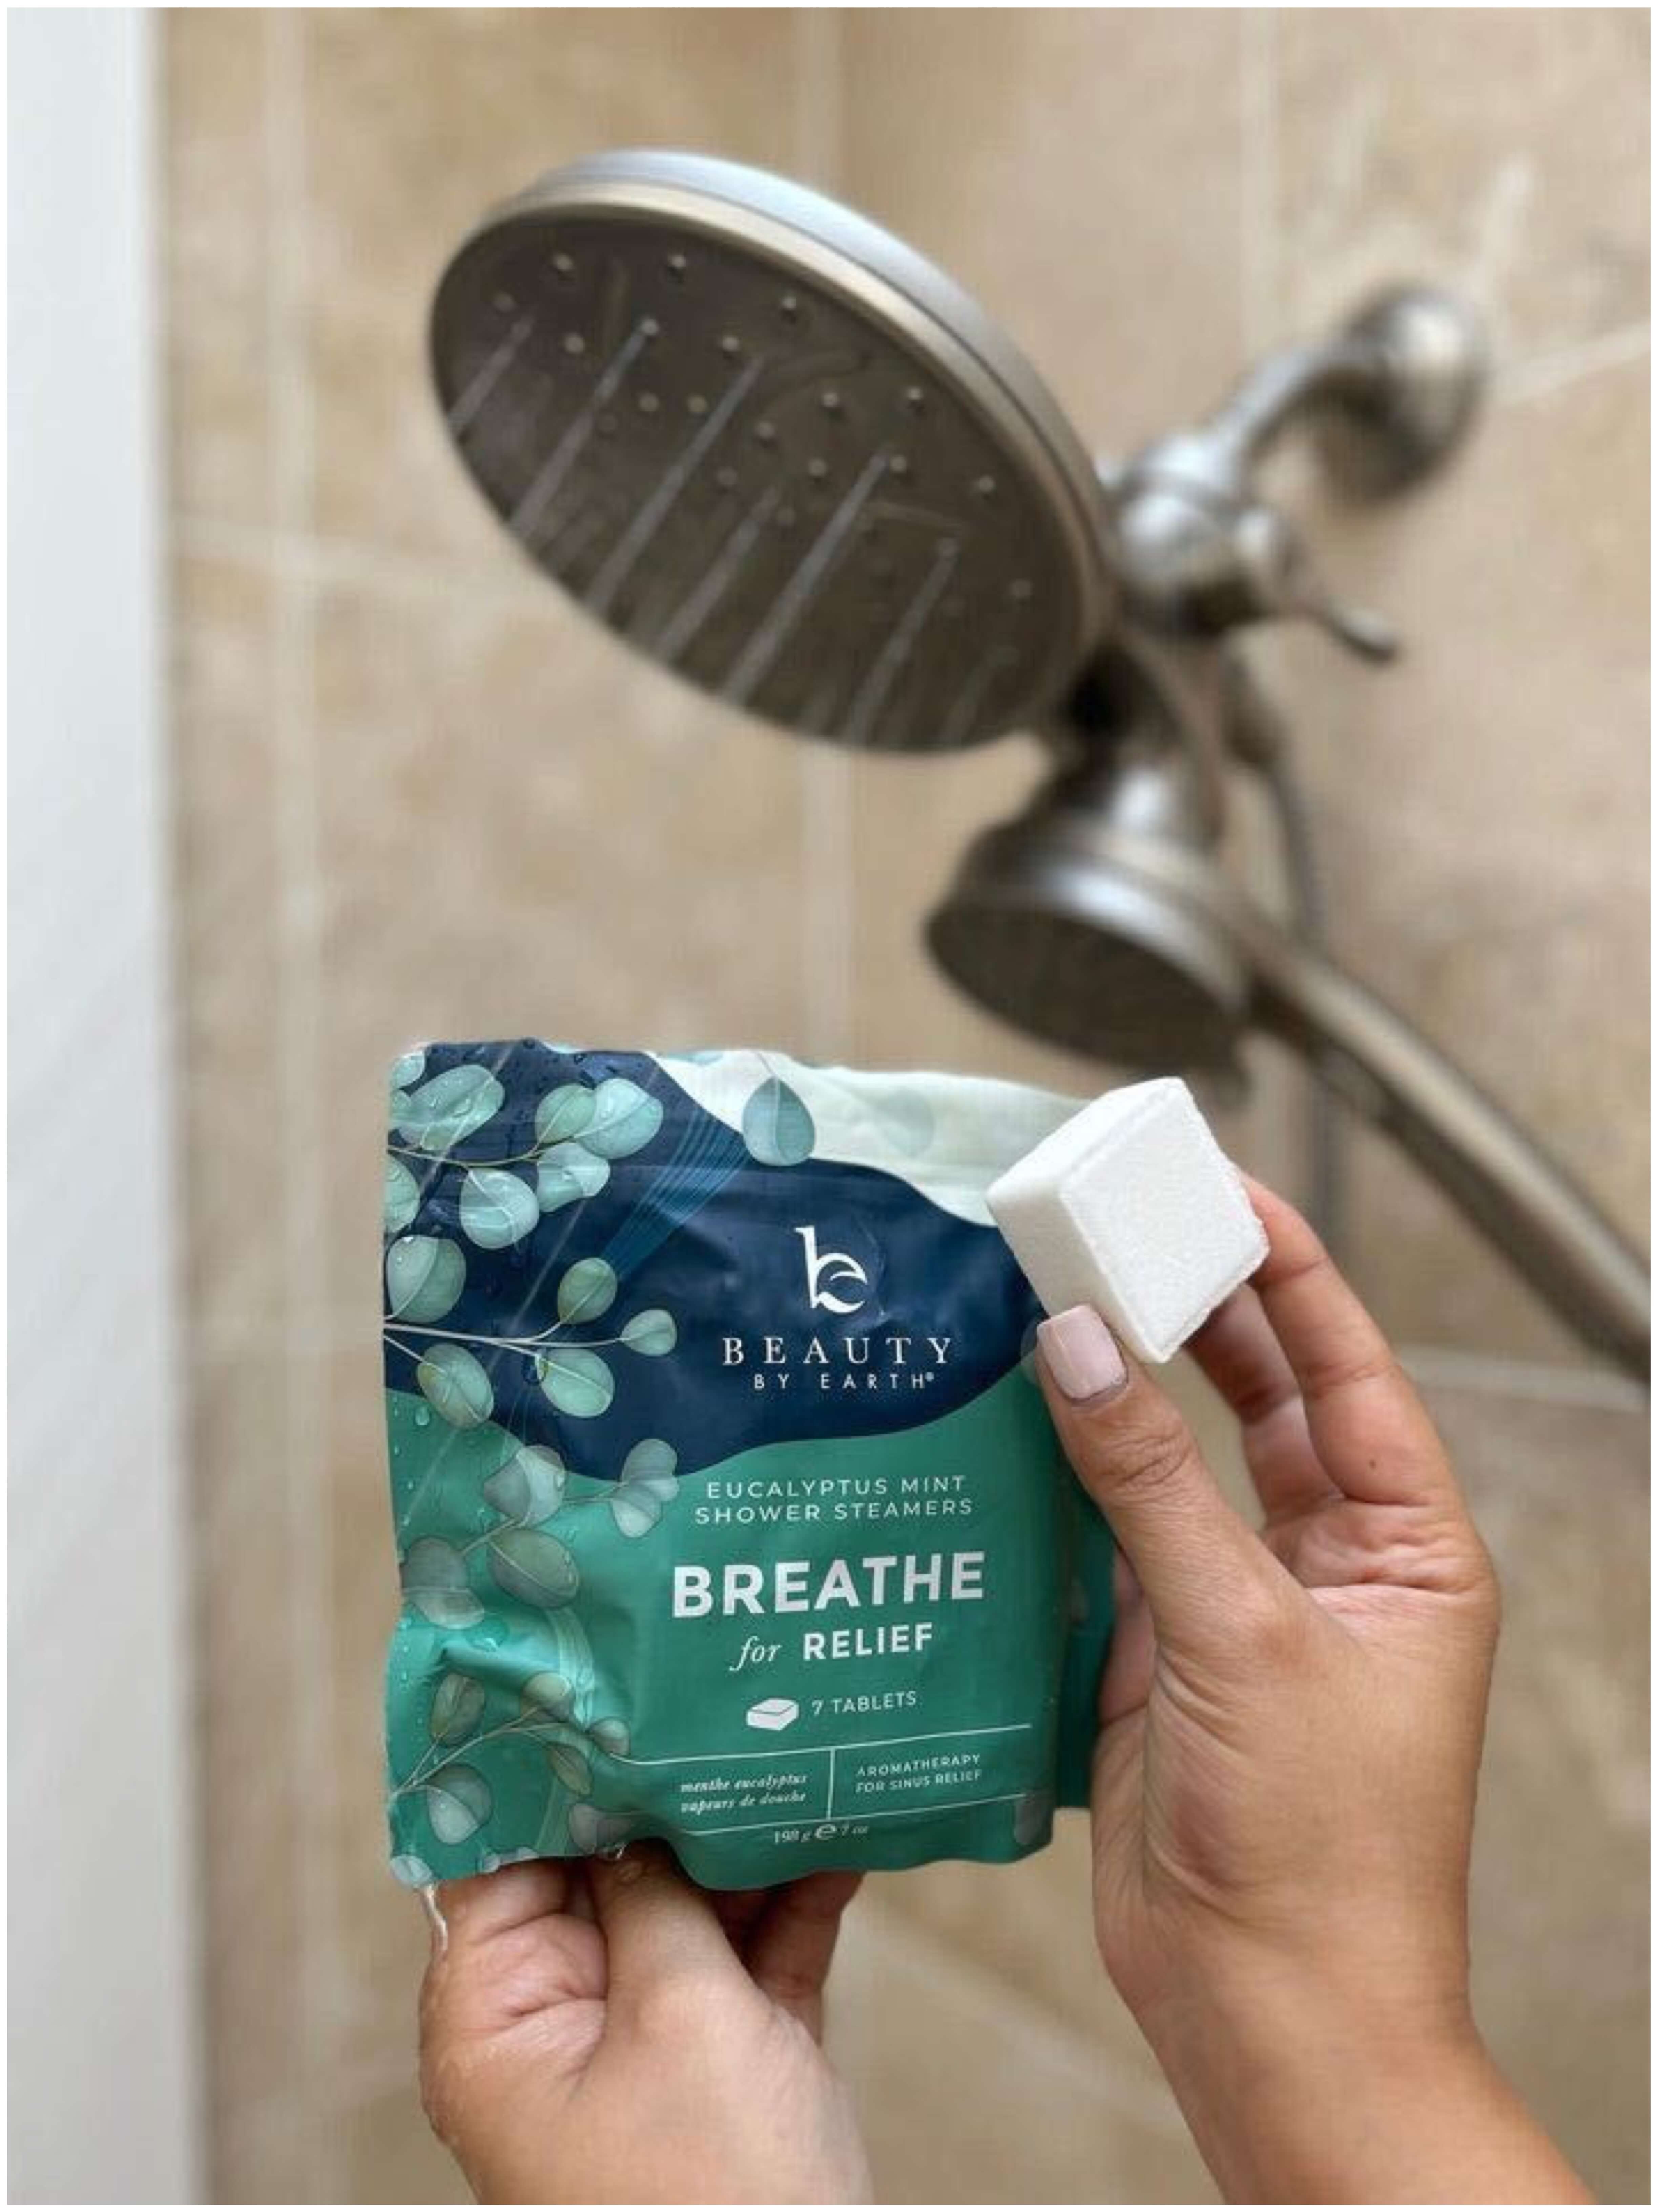 Photo of Breathe Beauty by Earth shower steamers and a shower